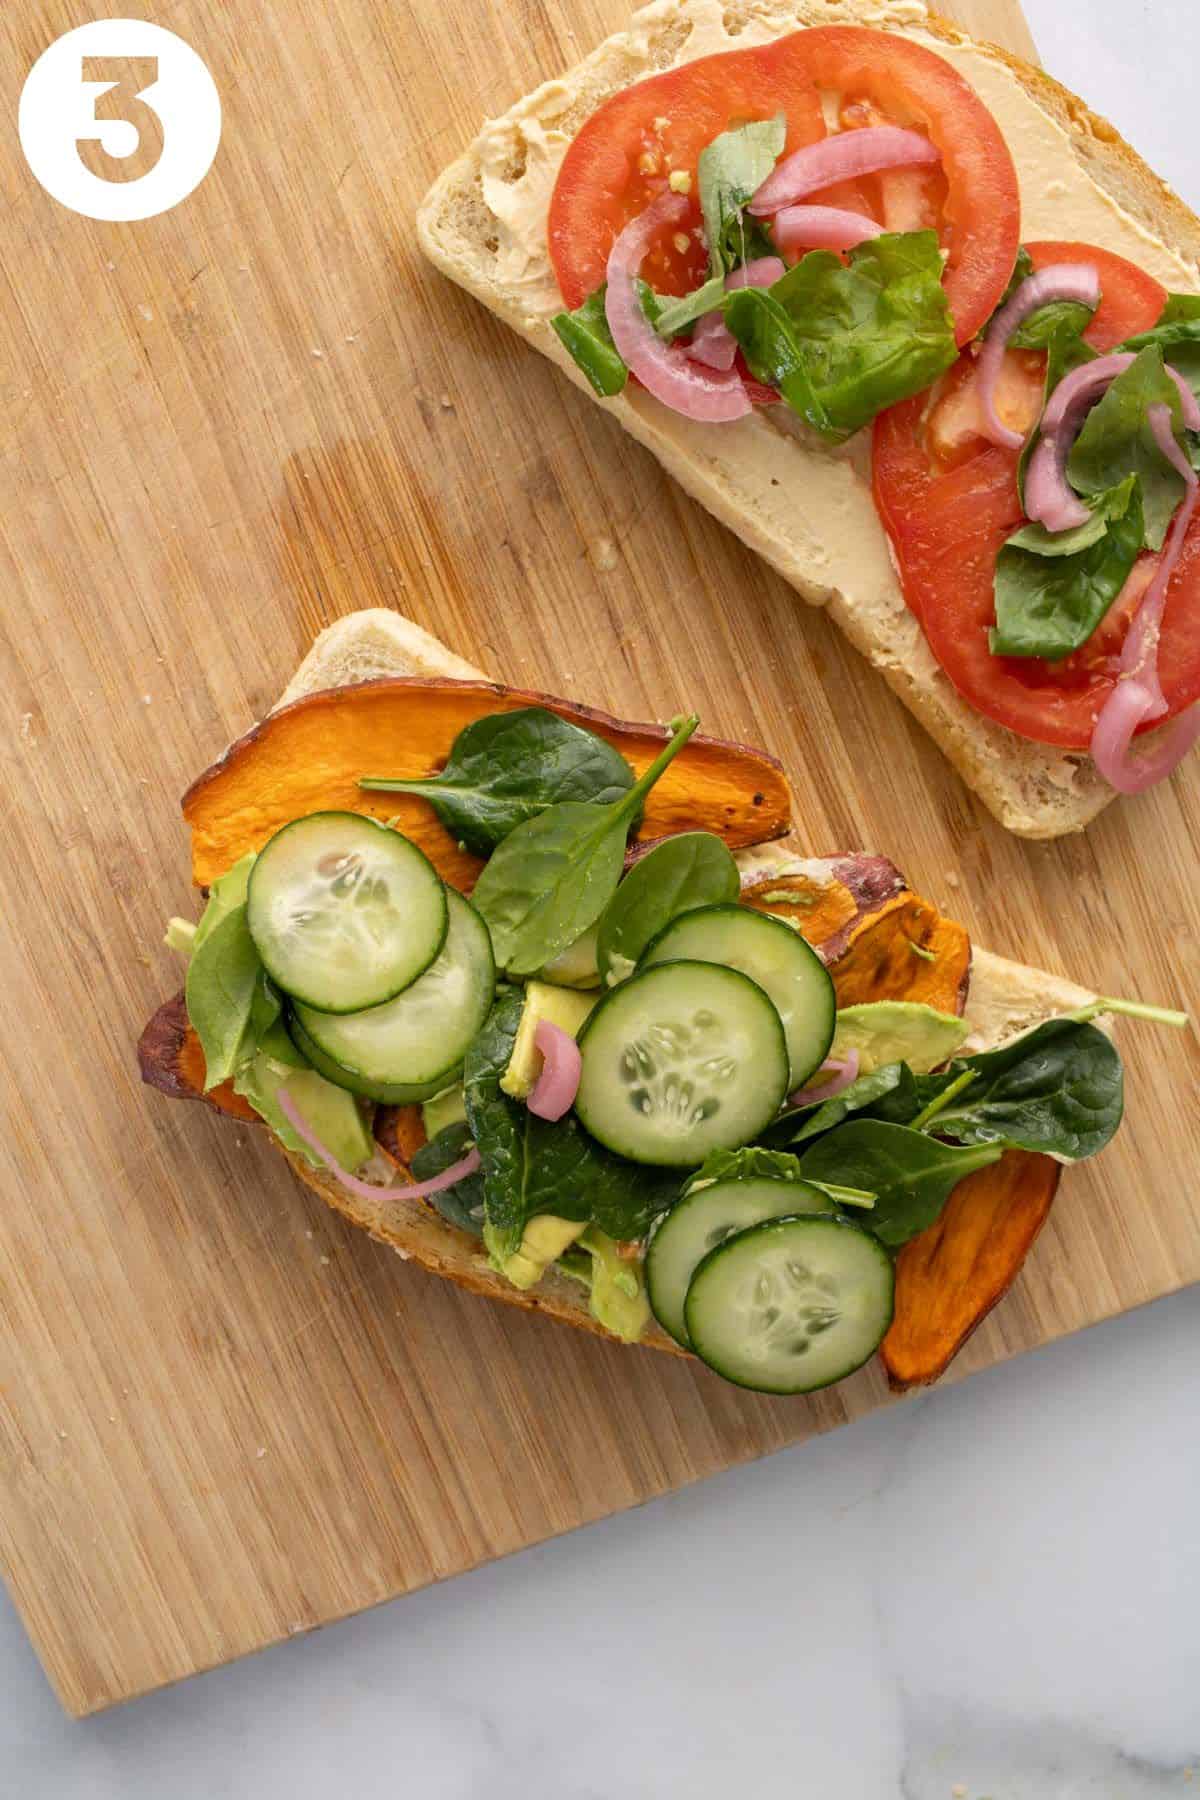 Veggie hummus sandwich with sweet potato, avocado, and cucumber open-faced on a wood cutting board. Labeled "3."